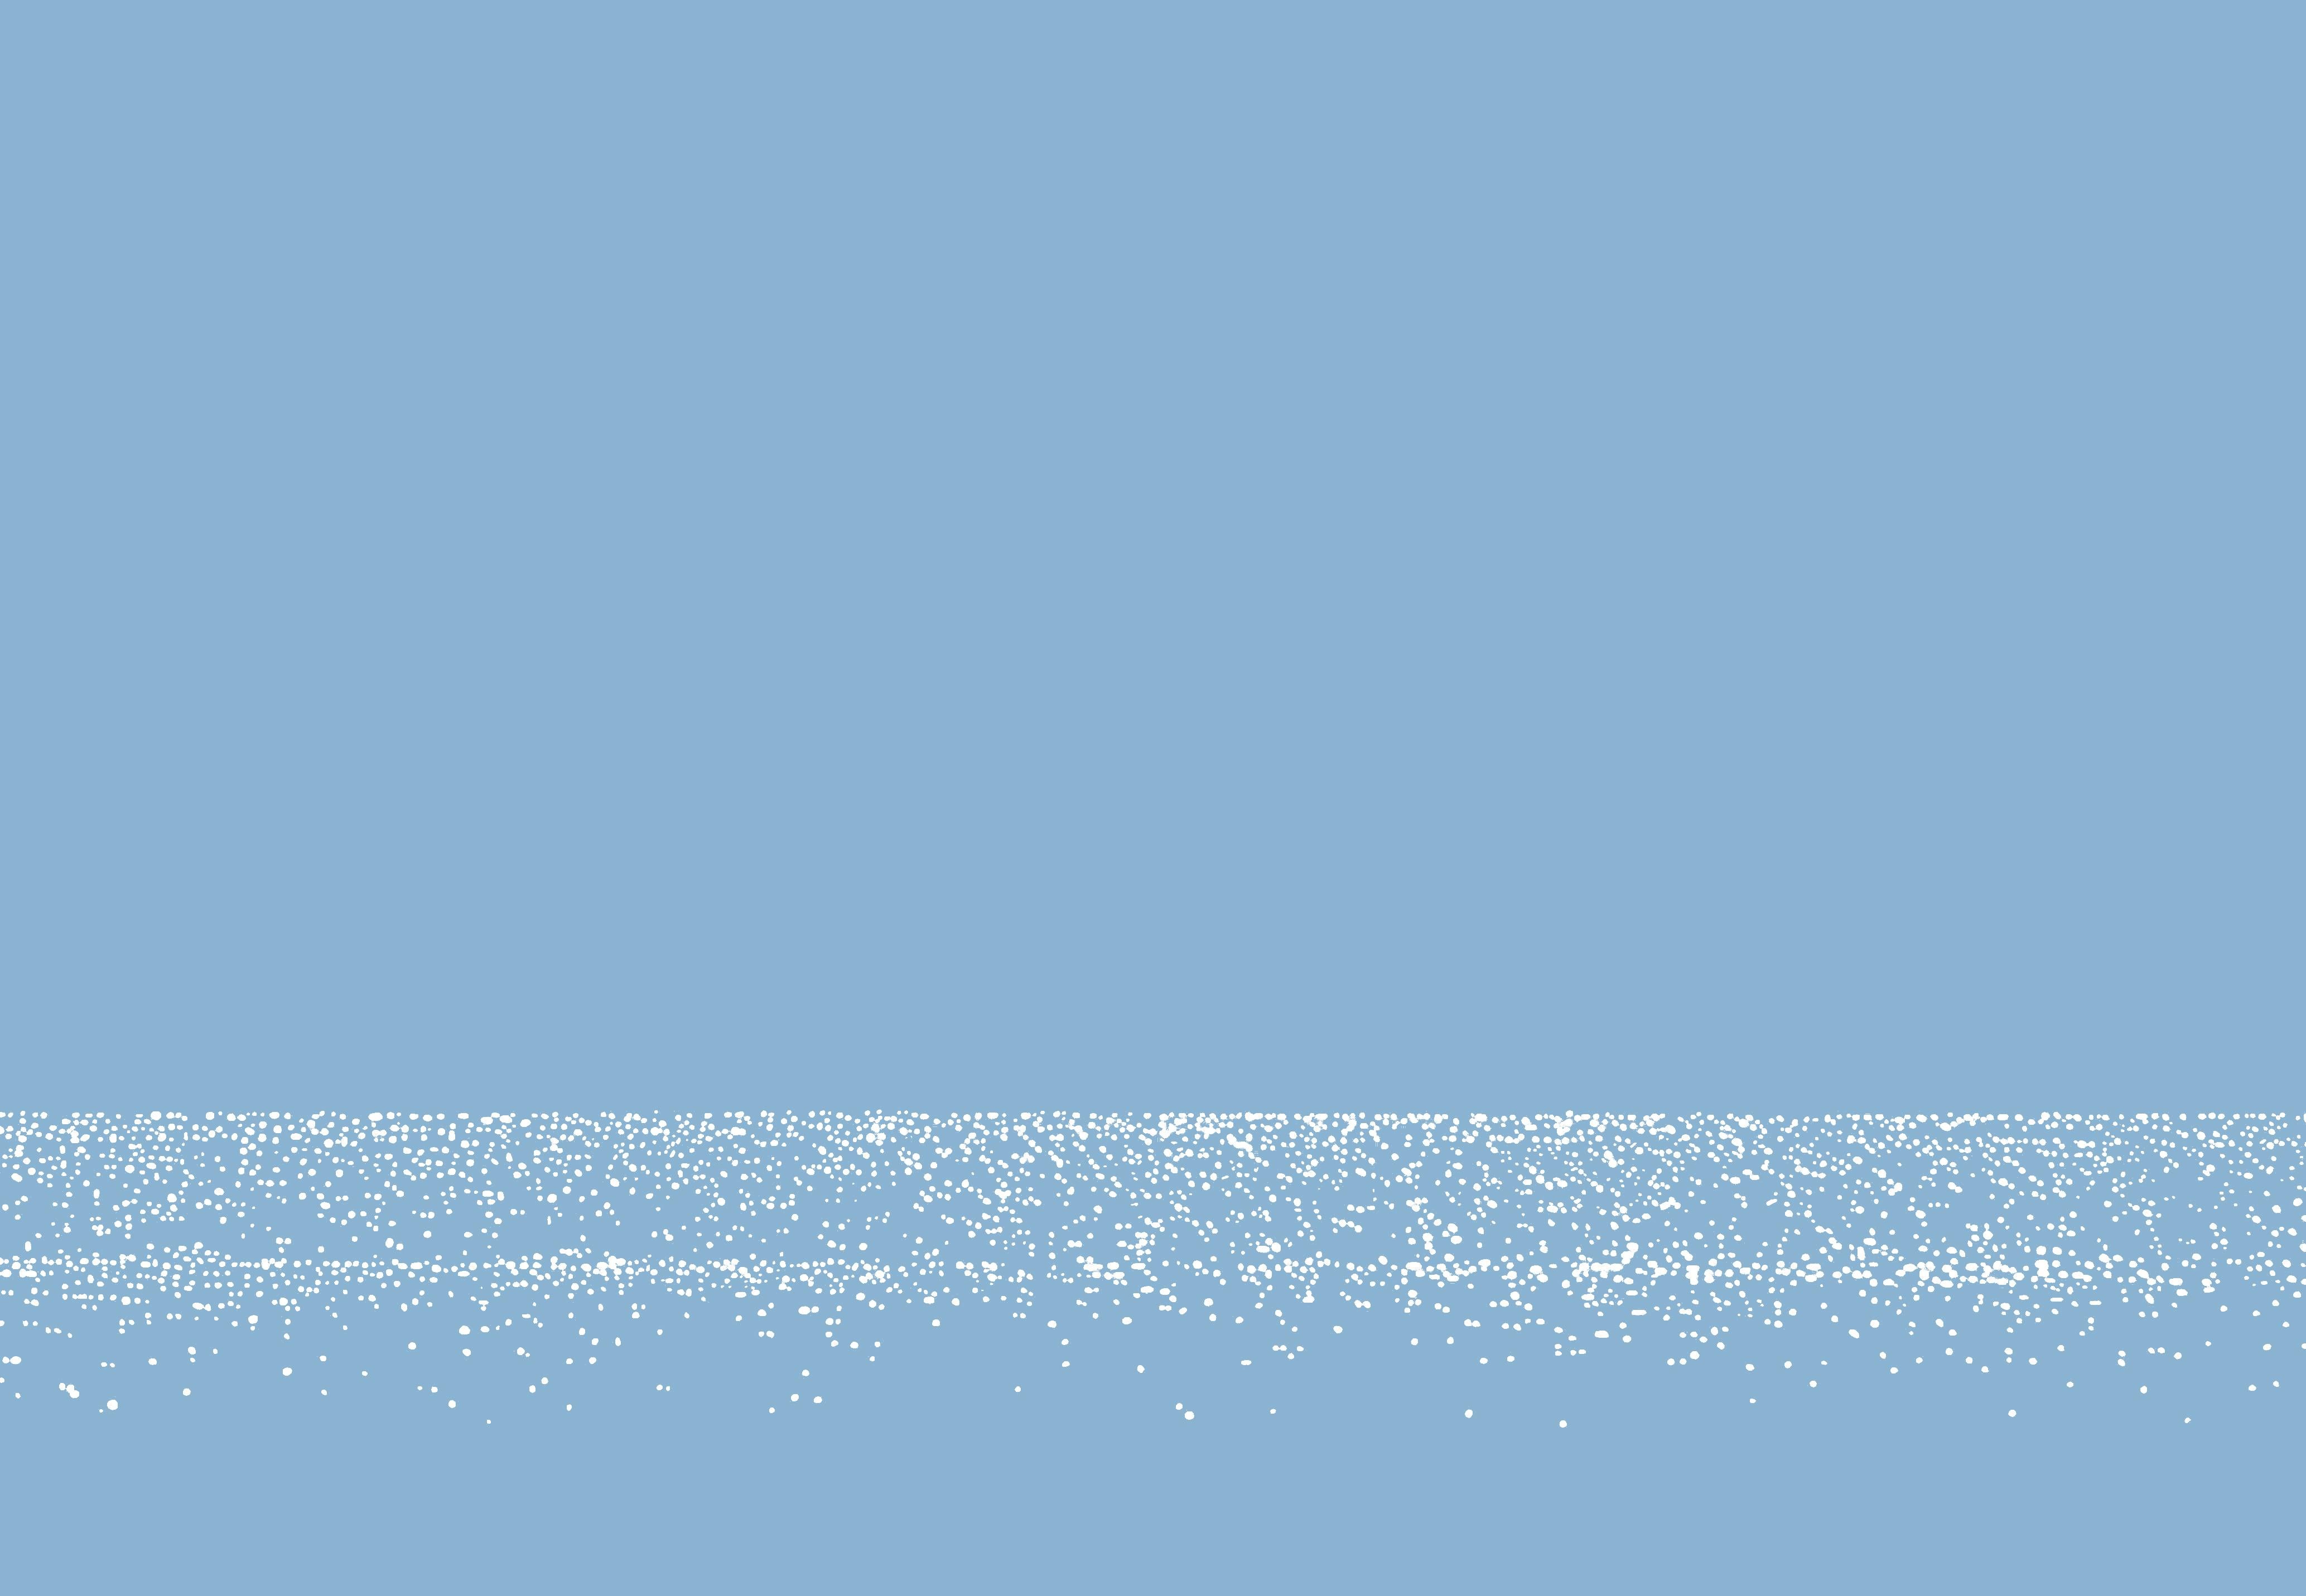 Light 28 August 19:59, Modern Landscape Painting, Minimalistic, Abstract, Sea 